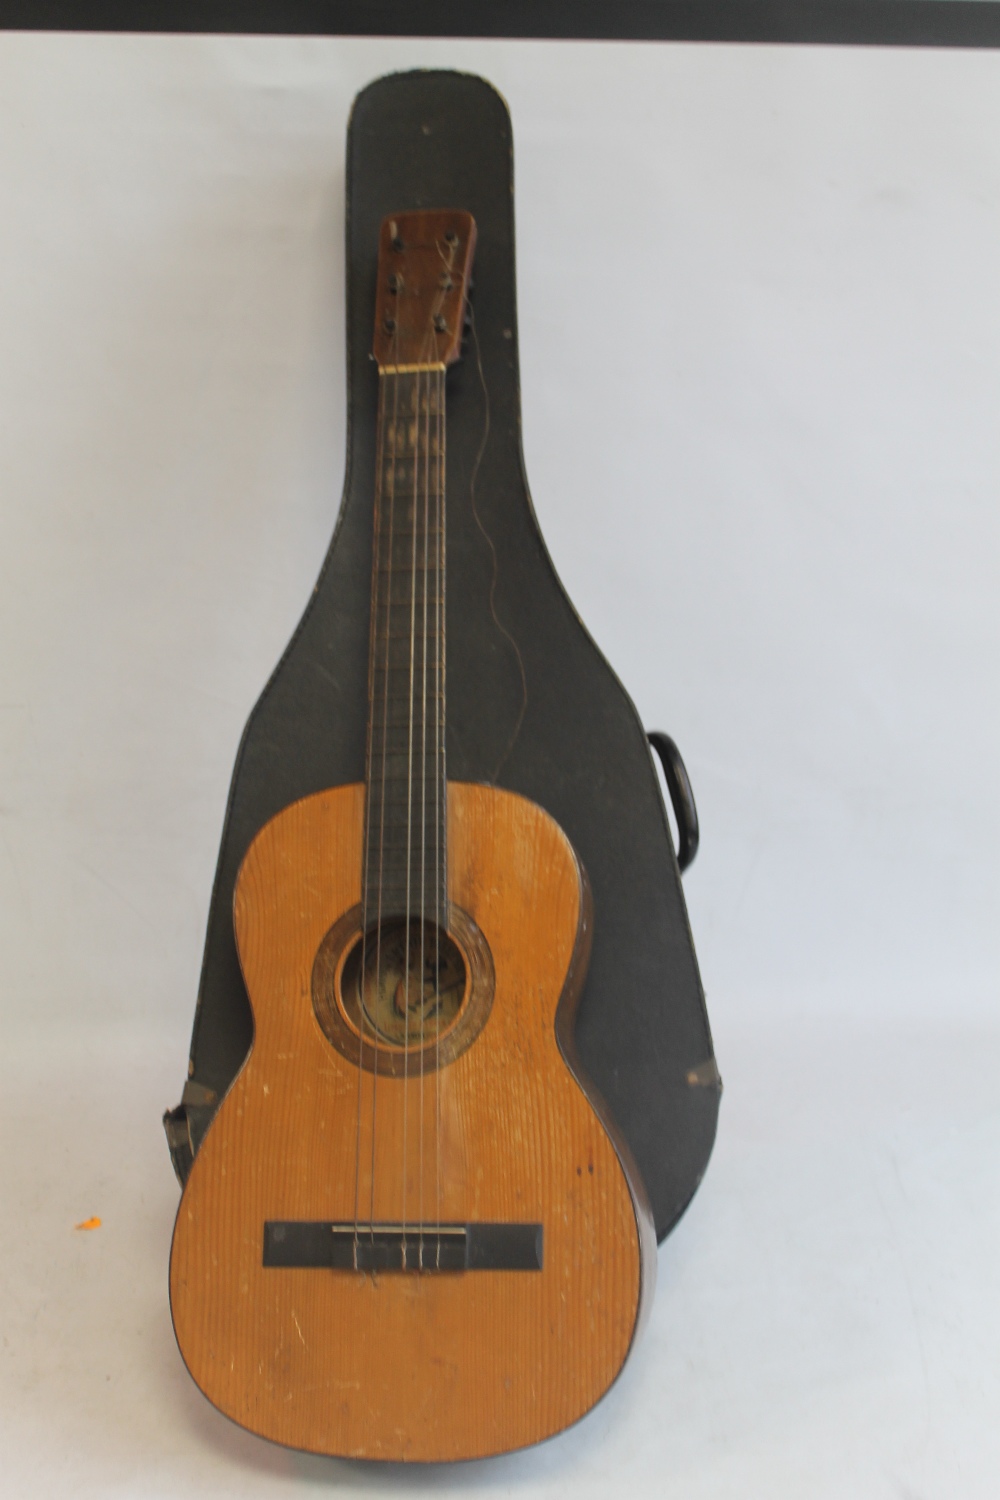 A VINTAGE SPANISH VINCENTE TATAY GUITAR IN CARRY CASE